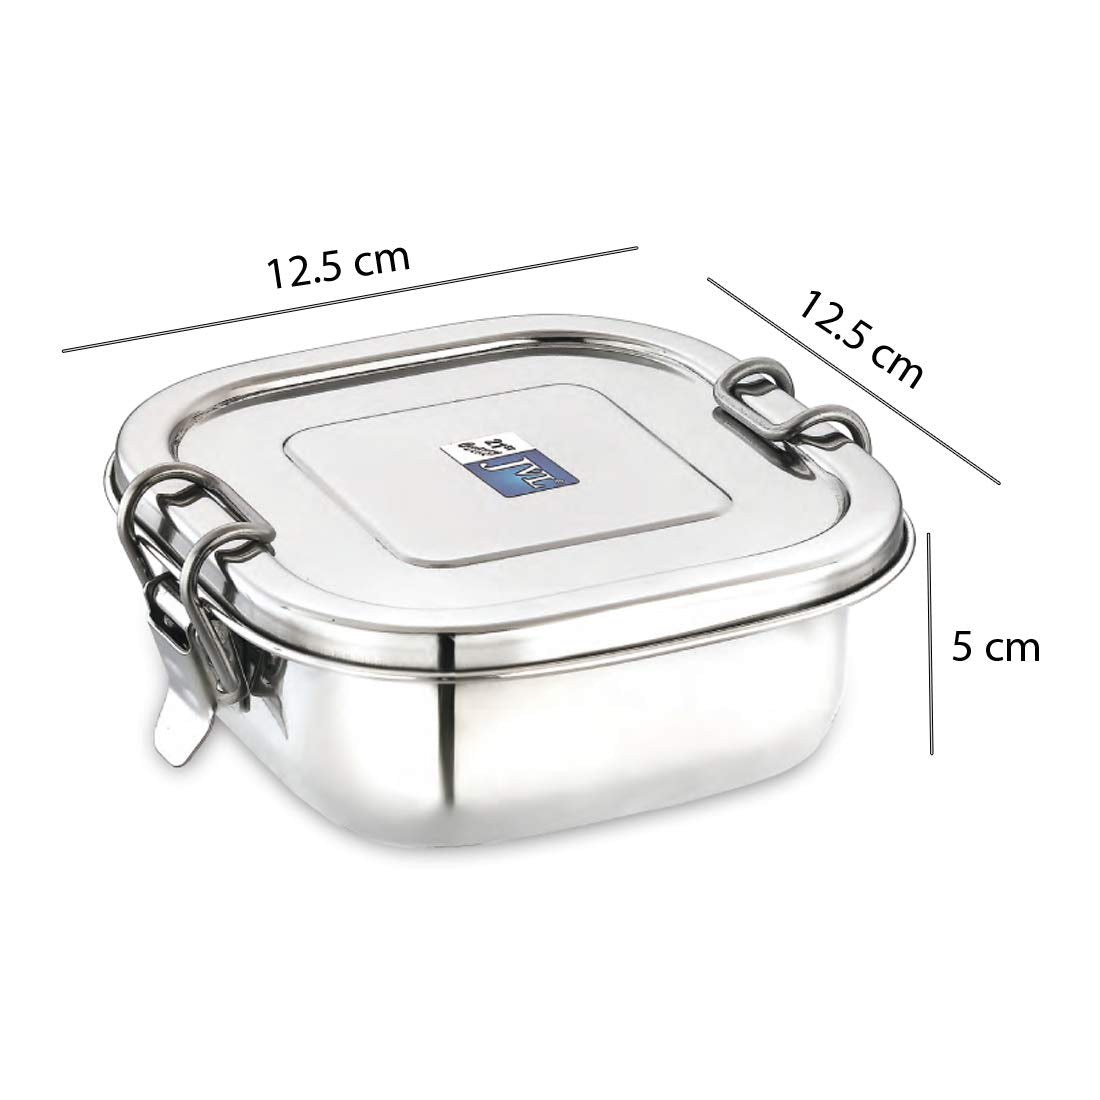 JVL Leakproof Square Stainless Steel Lunch Box with Silicone Gasket and Stainless Steel Inner Plate